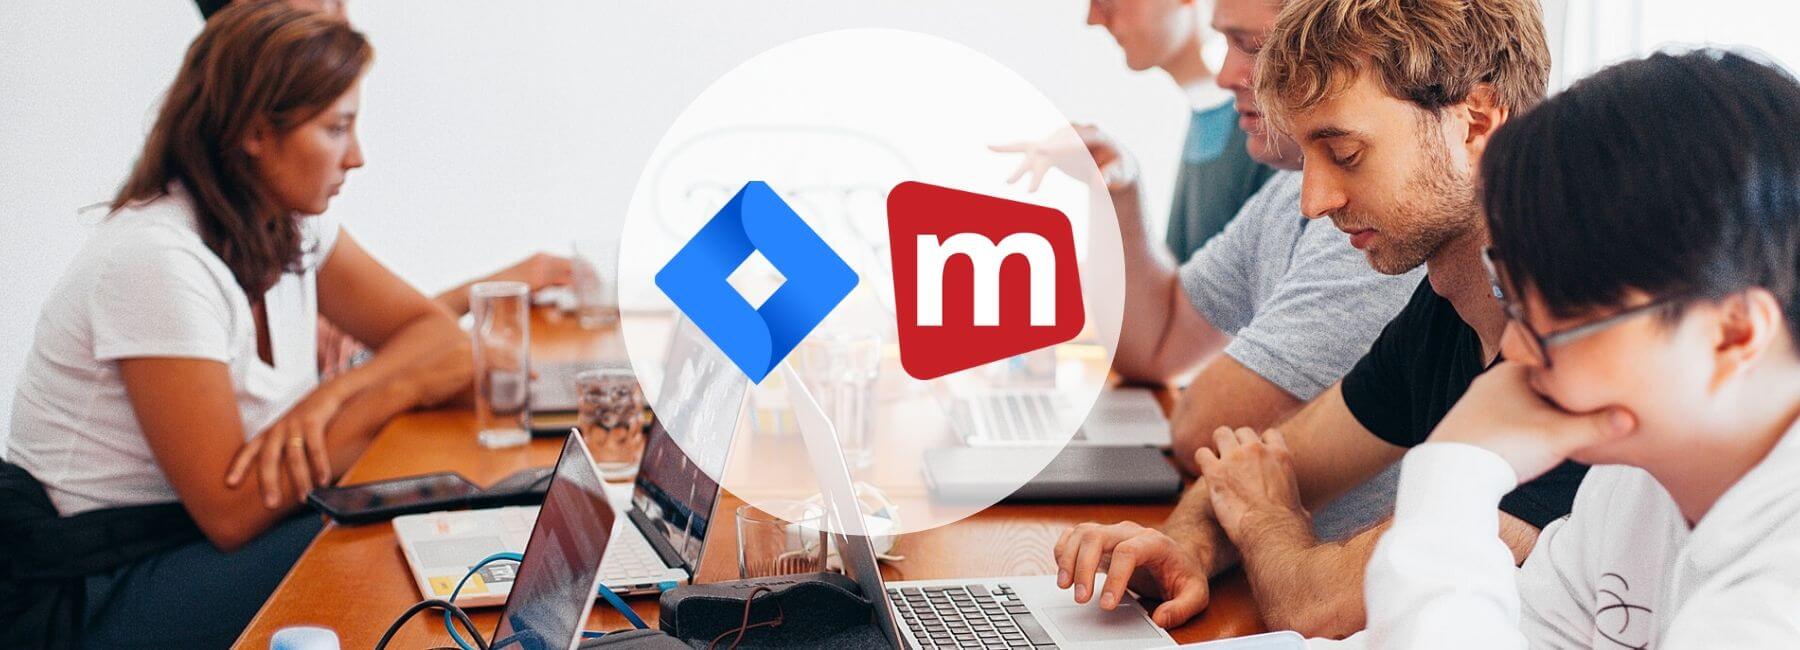 Mopinion integrates with Atlassian’s issue tracking tool JIRA